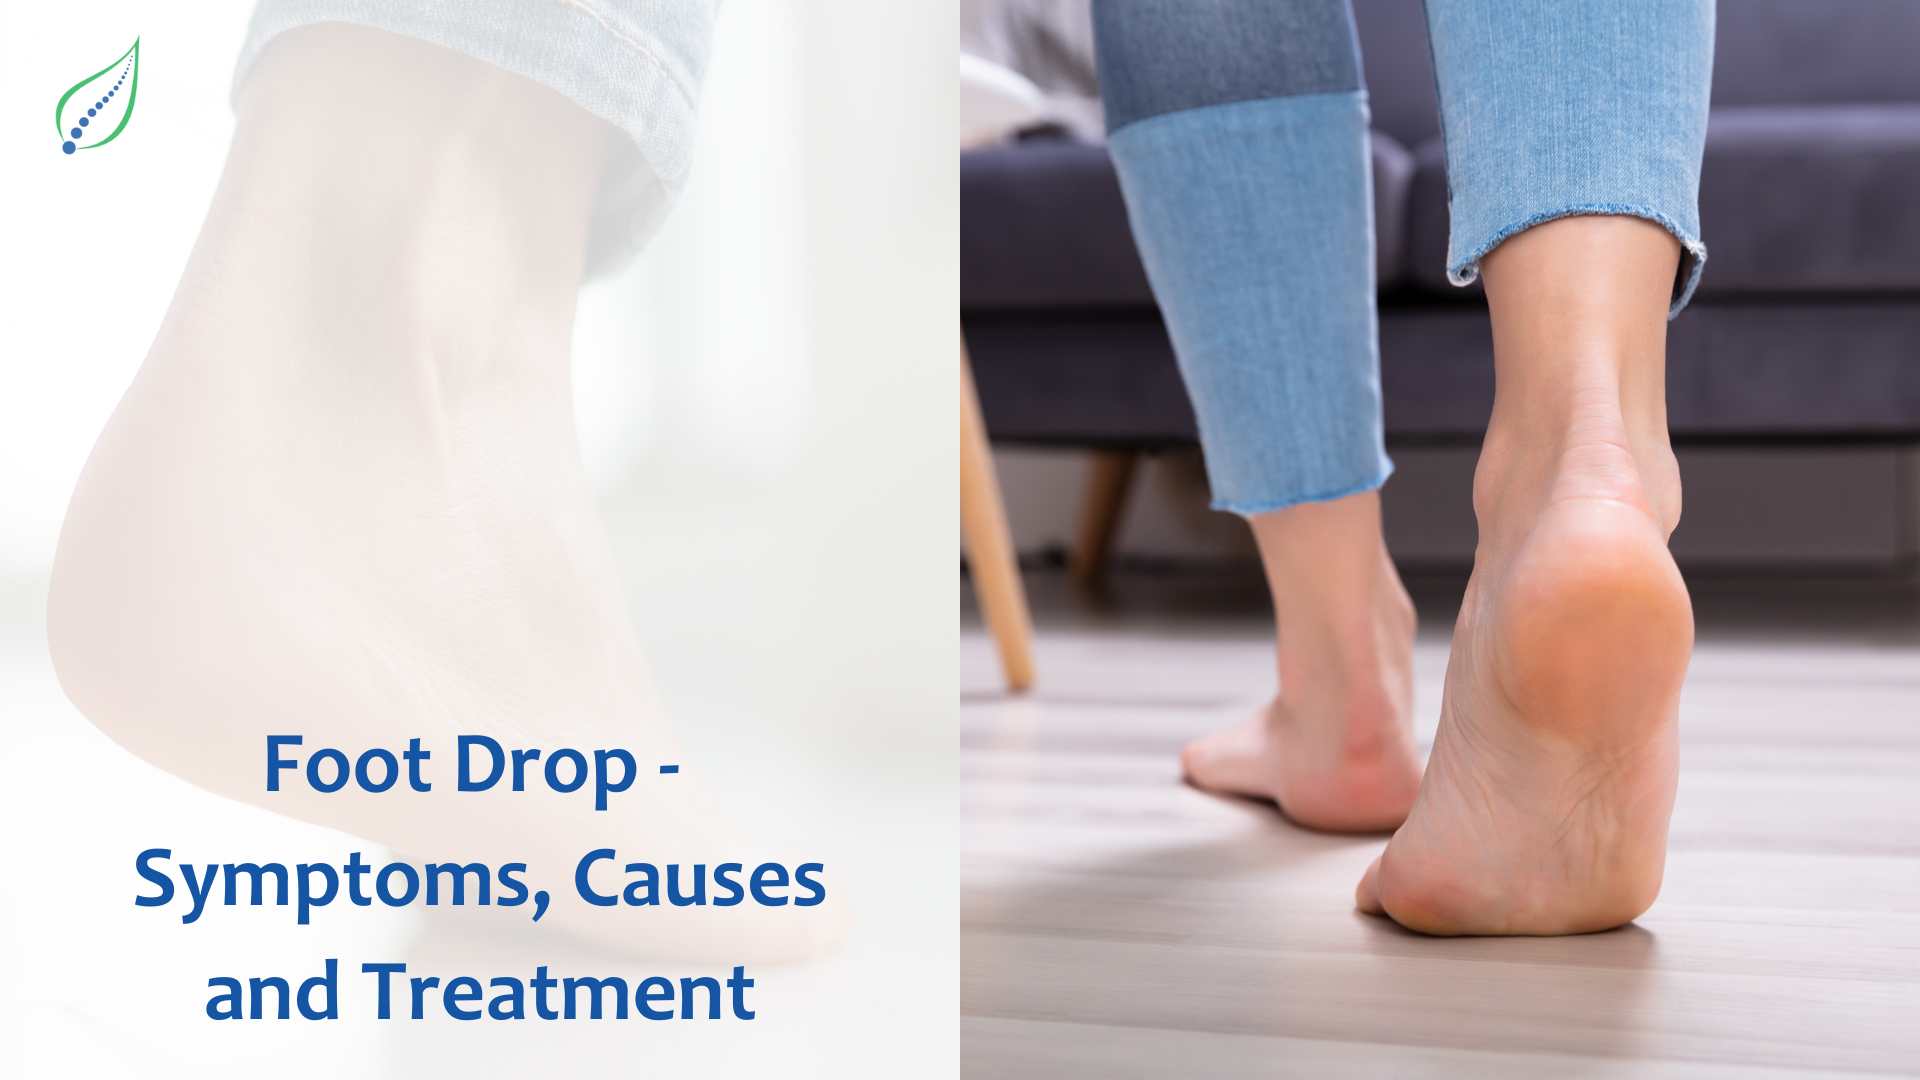 Foot Drop - Symptoms, Causes and Treatment